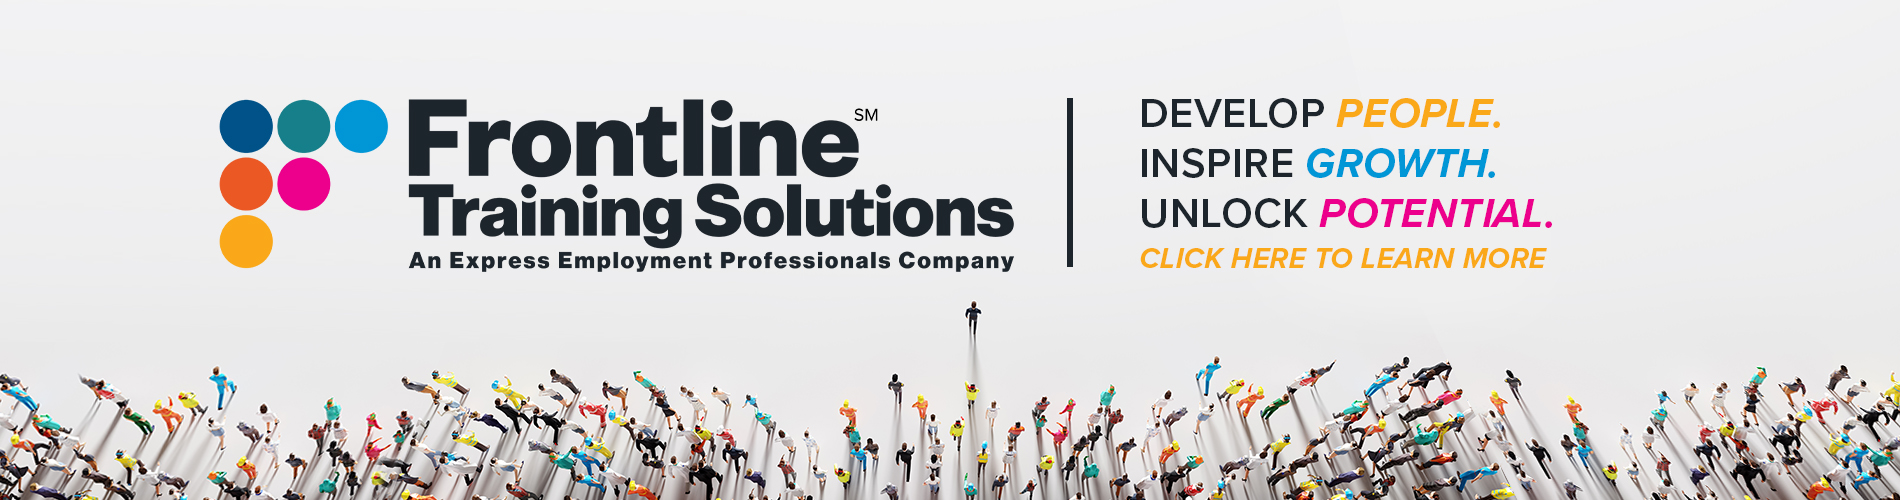 Frontline Training Solutions - Homepage banner